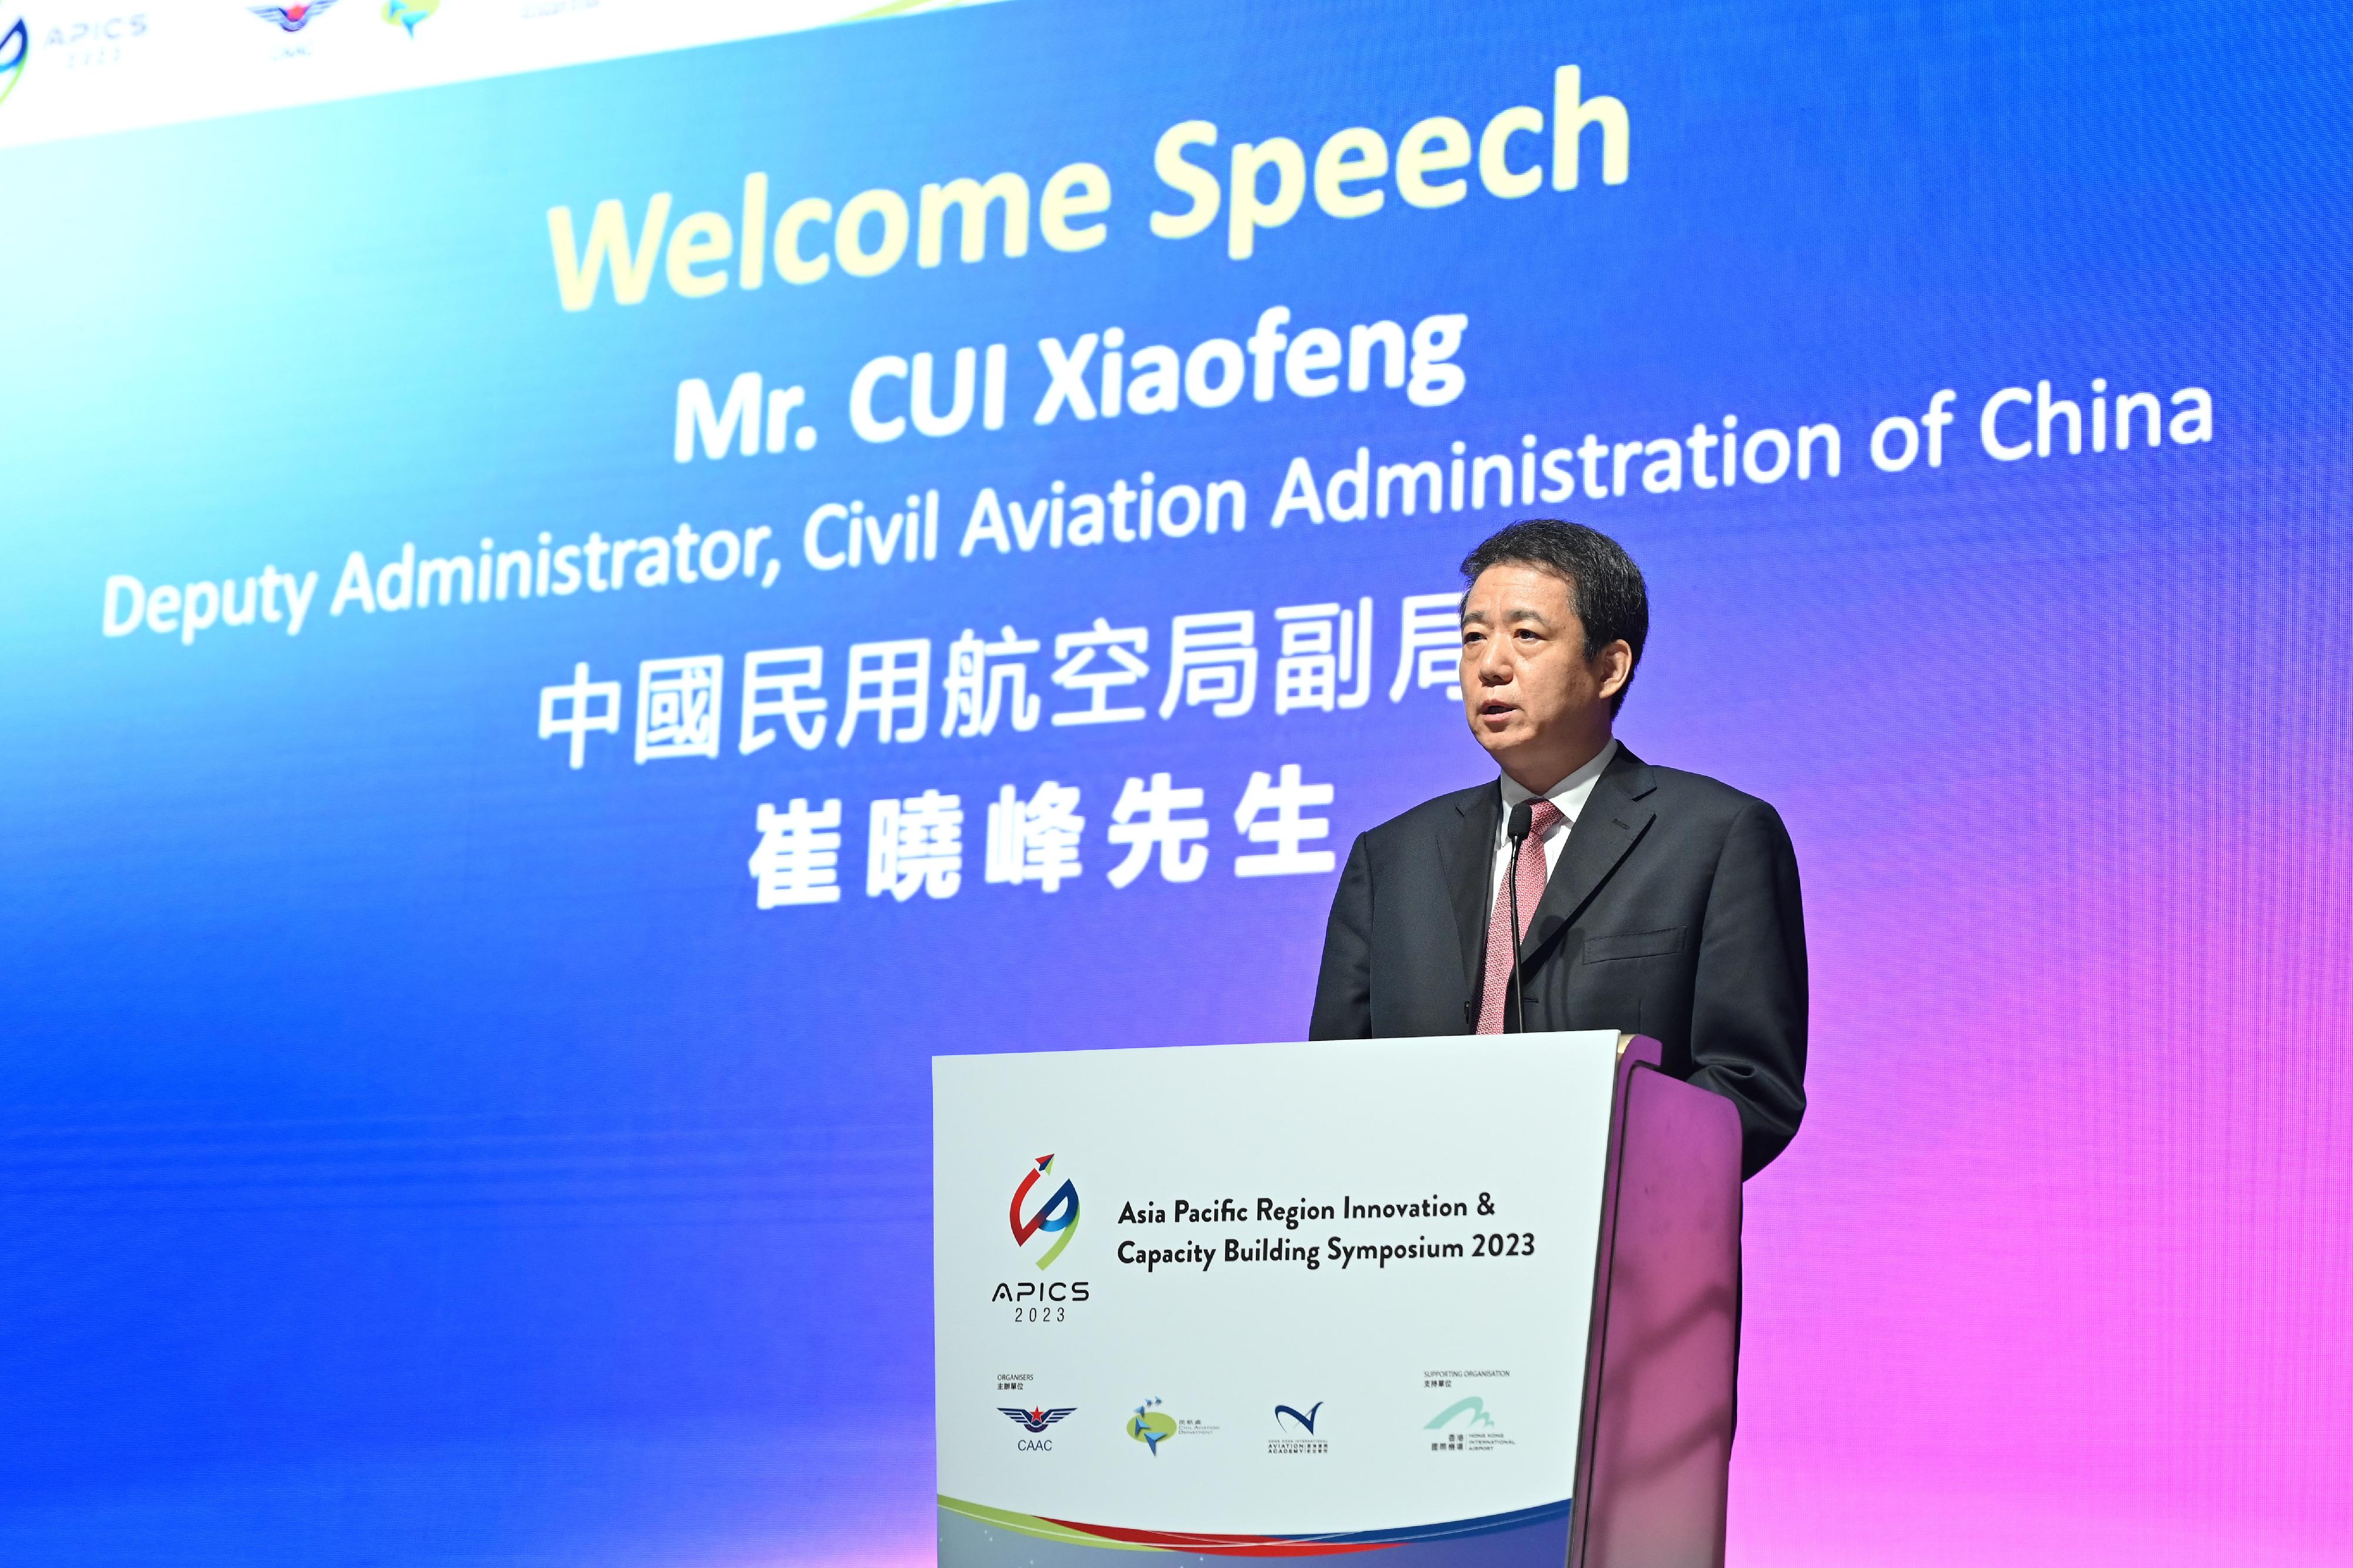 The Asia Pacific Region Innovation & Capacity Building Symposium 2023 (APICS 2023) commenced today (December 14). Photo shows Deputy Administrator of the Civil Aviation Administration of China Mr Cui Xiaofeng speaking at the APICS 2023 opening ceremony. 